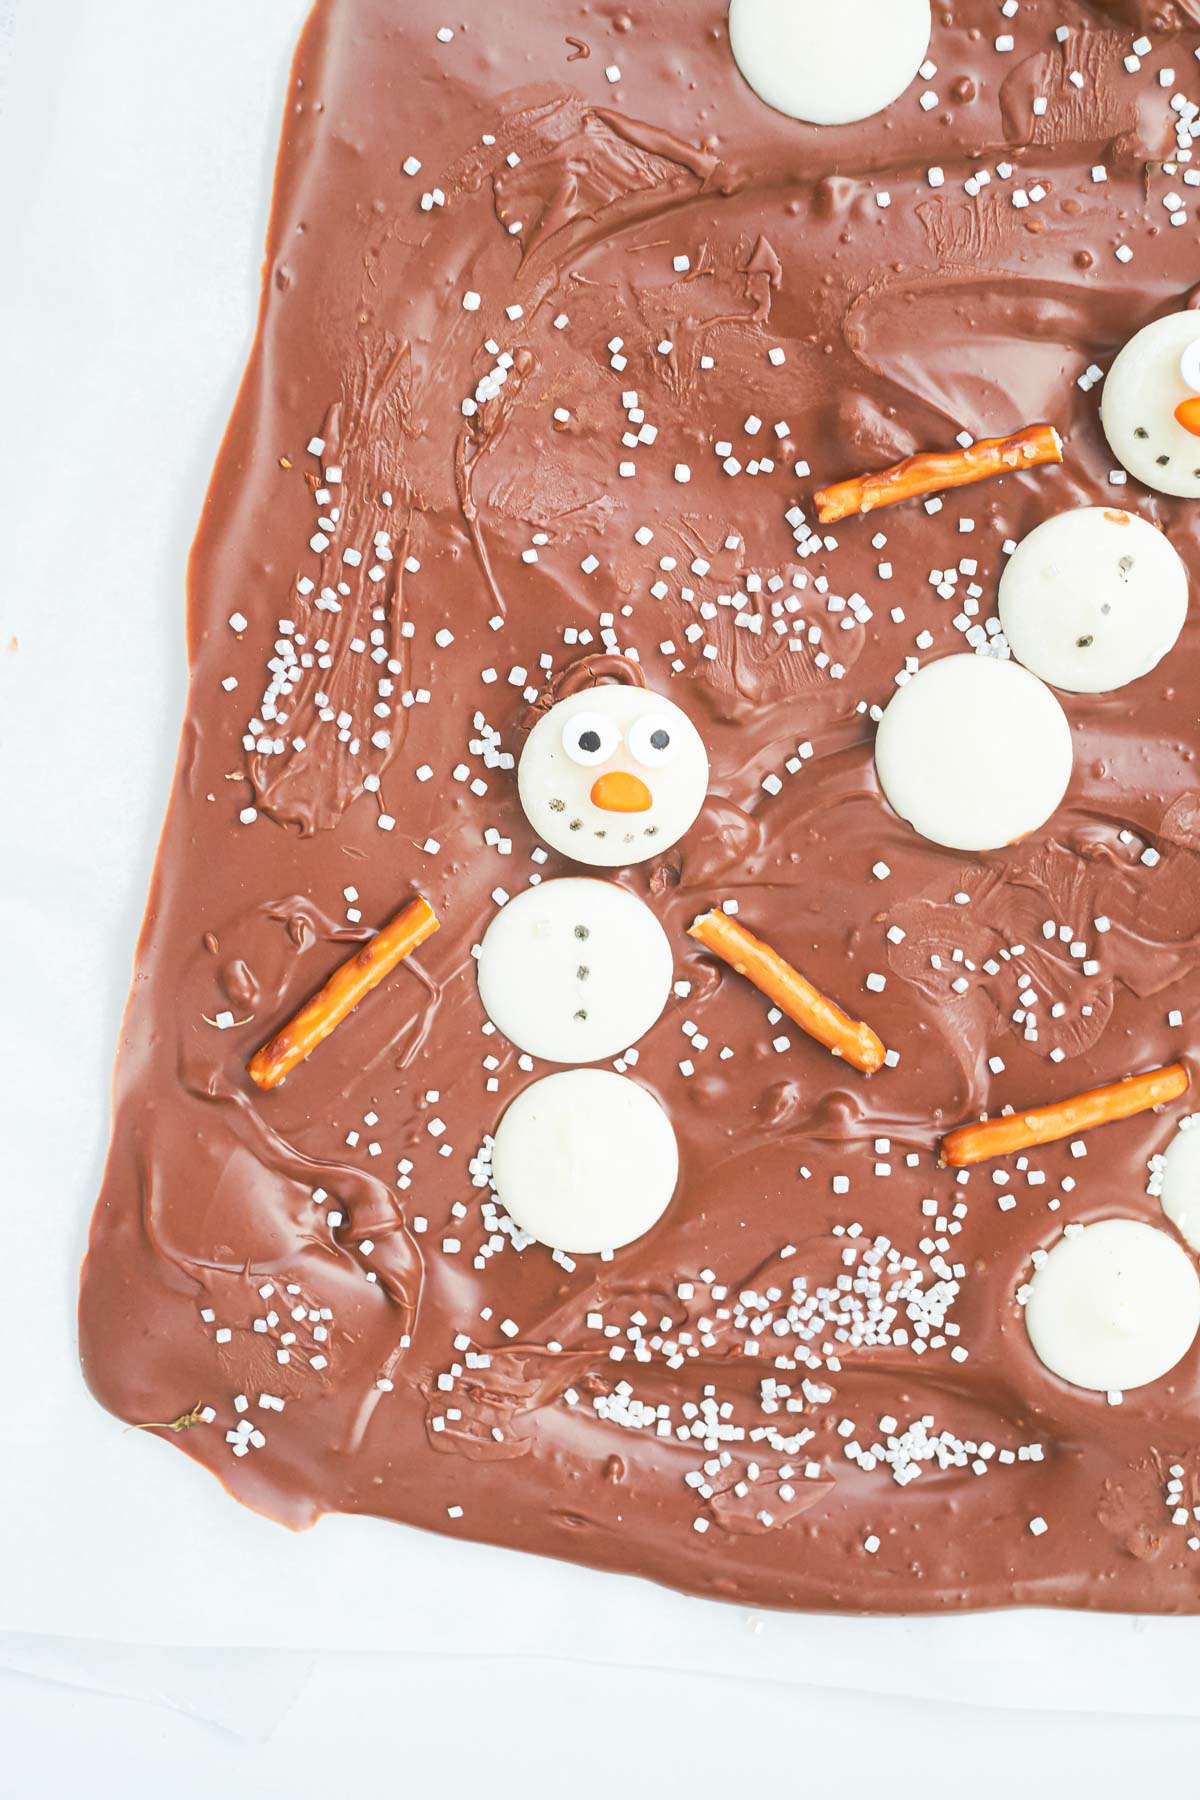 the finished melted snowman chocolate bark ready to be served